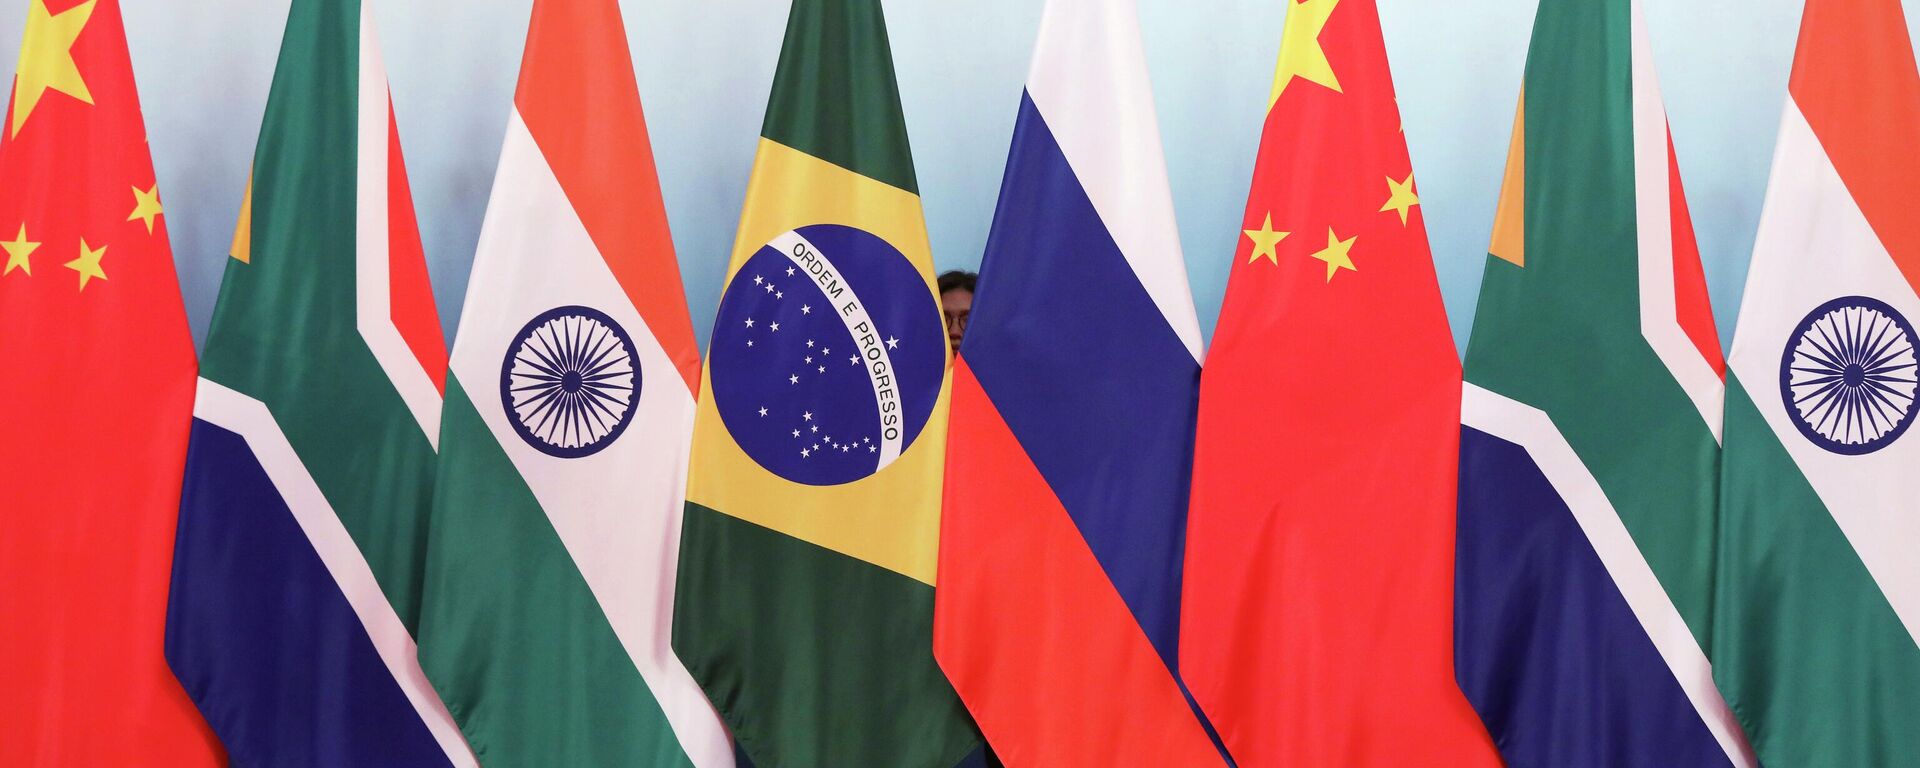 Staff worker stands behind national flags of Brazil, Russia, China, South Africa and India to tidy the flags ahead of a group photo during the BRICS Summit at the Xiamen International Conference and Exhibition Center in Xiamen, southeastern China's Fujian Province, Monday, Sept. 4, 2017. - Sputnik International, 1920, 27.07.2023